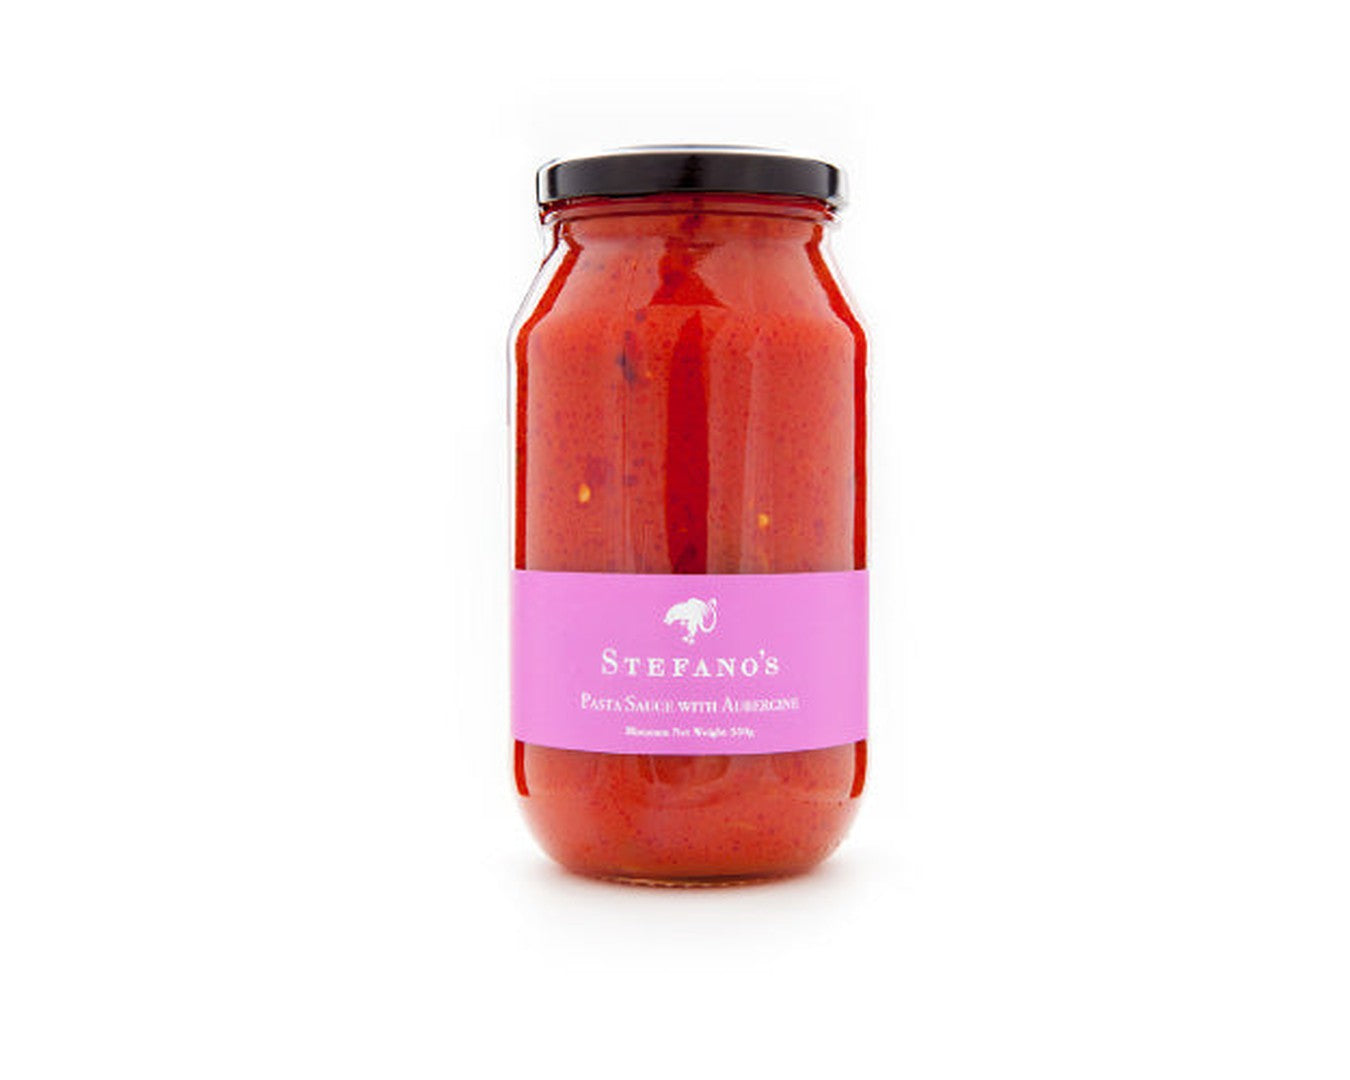 Stefano's Pasta Sauce with Aubergine 530gr-Pasta Sauce-The Local Basket